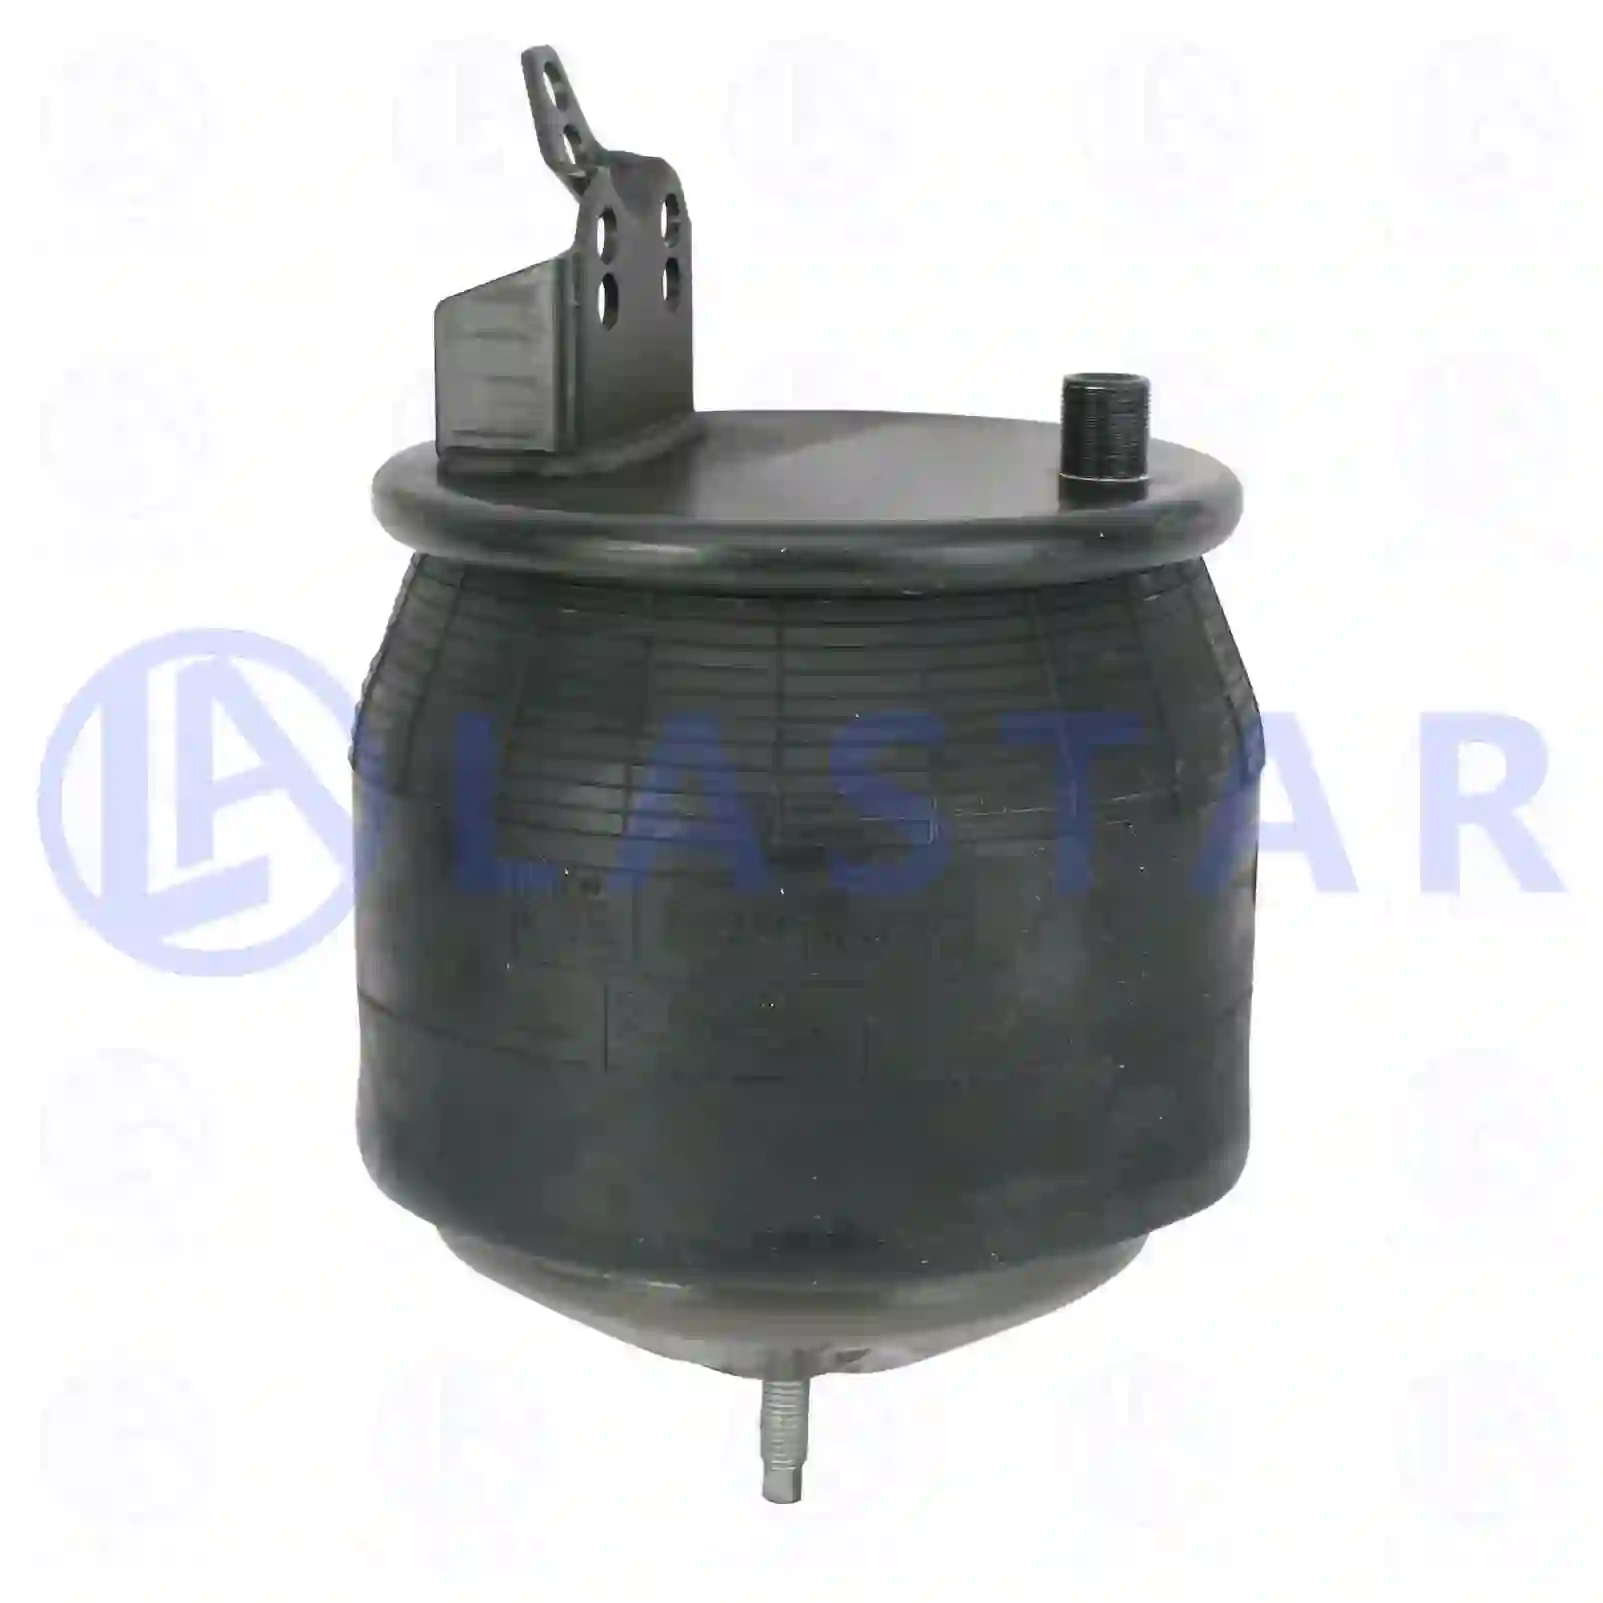 Air spring, with steel piston, 77728699, MLF7154, MLF7181, 20375227, 20427801, 20427804, 20456154, 20531986, 20582209, 21961443, 3171694, ZG40760-0008 ||  77728699 Lastar Spare Part | Truck Spare Parts, Auotomotive Spare Parts Air spring, with steel piston, 77728699, MLF7154, MLF7181, 20375227, 20427801, 20427804, 20456154, 20531986, 20582209, 21961443, 3171694, ZG40760-0008 ||  77728699 Lastar Spare Part | Truck Spare Parts, Auotomotive Spare Parts